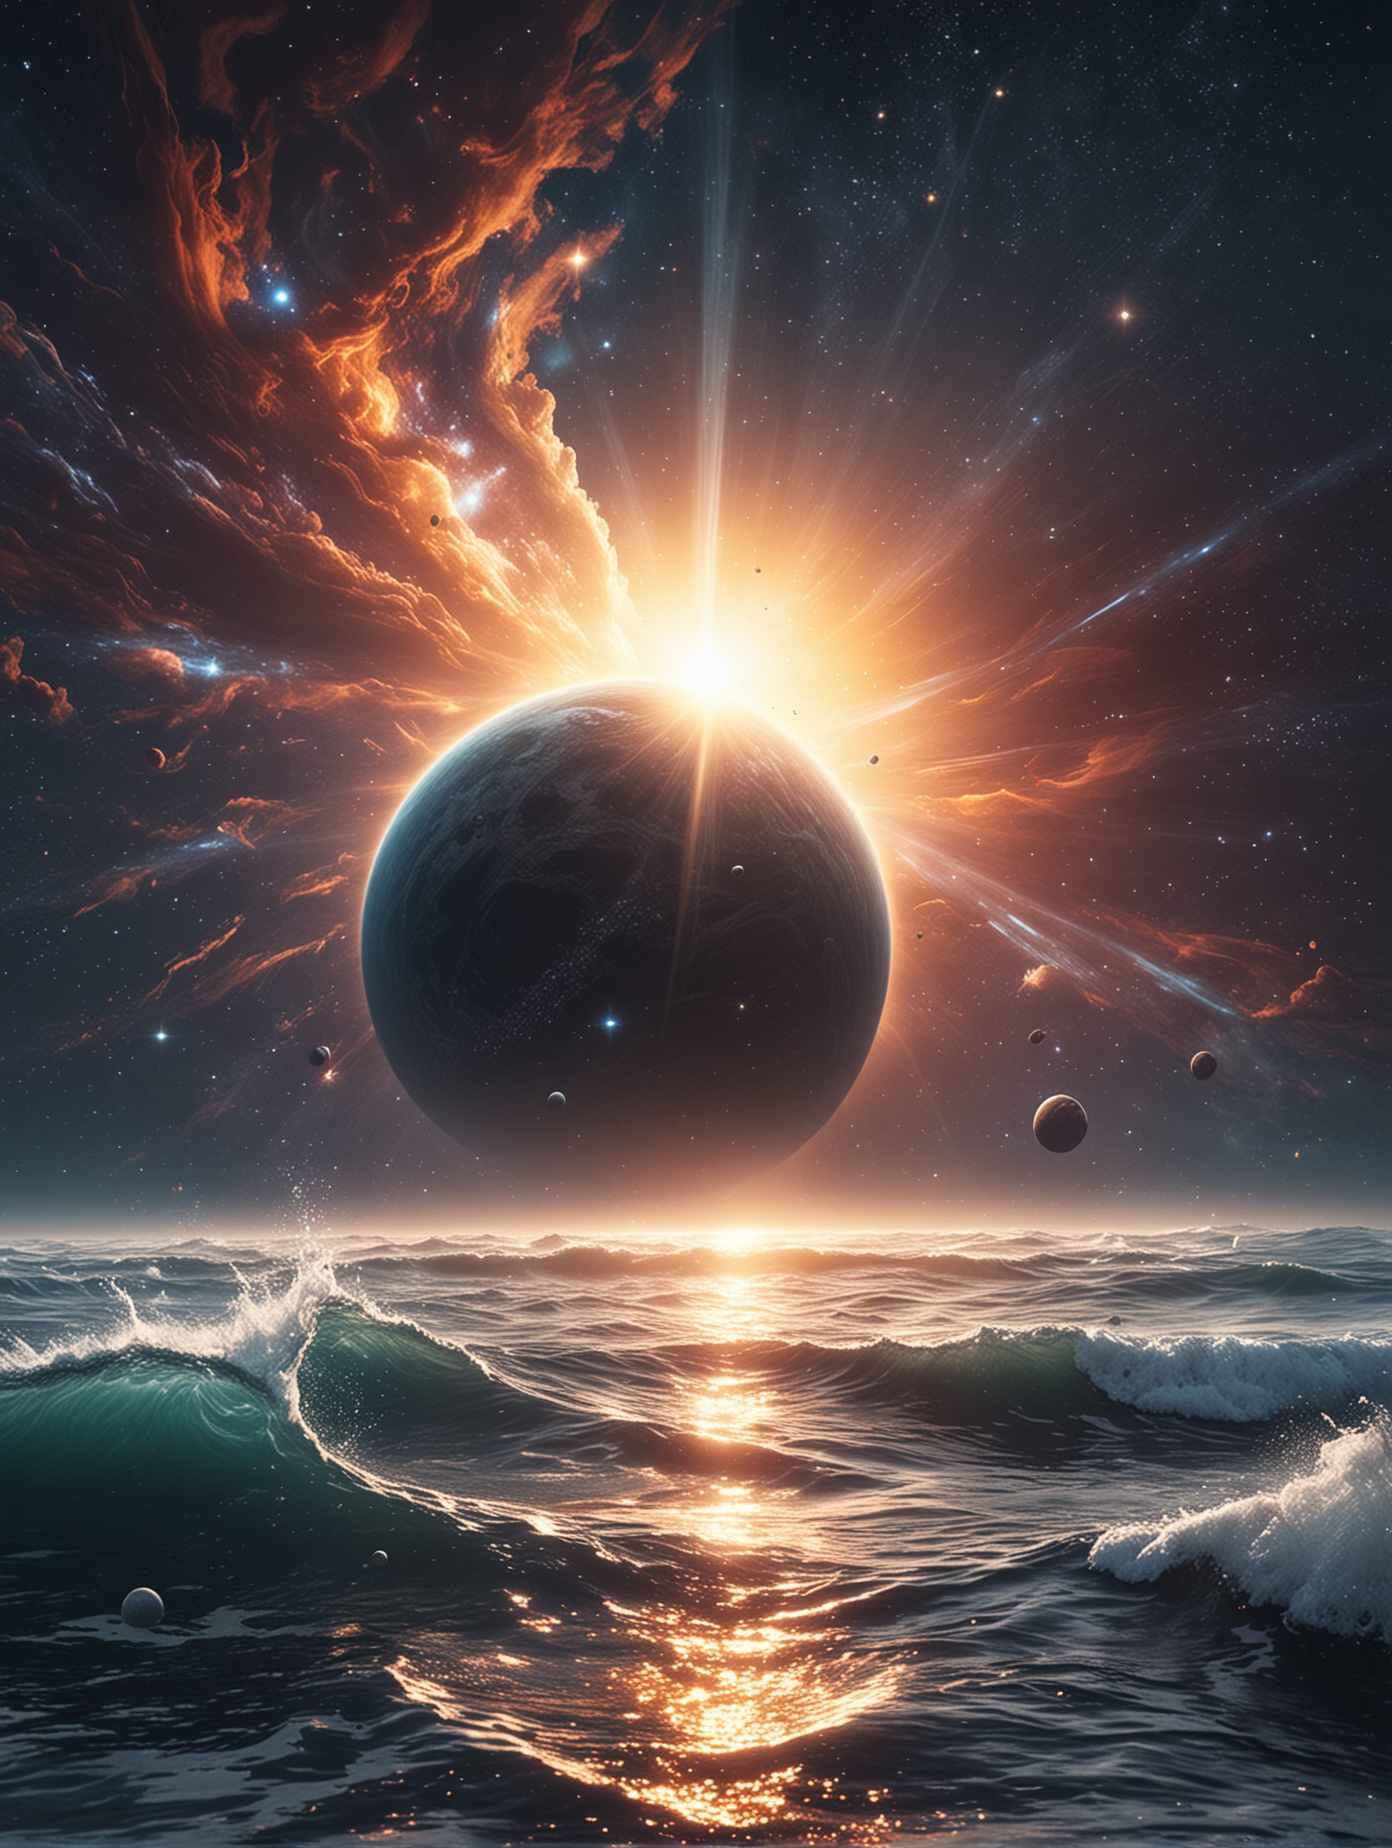 Sunrise Over Cosmic Waters Ethereal Scene of Outer Space with Reflective Waters